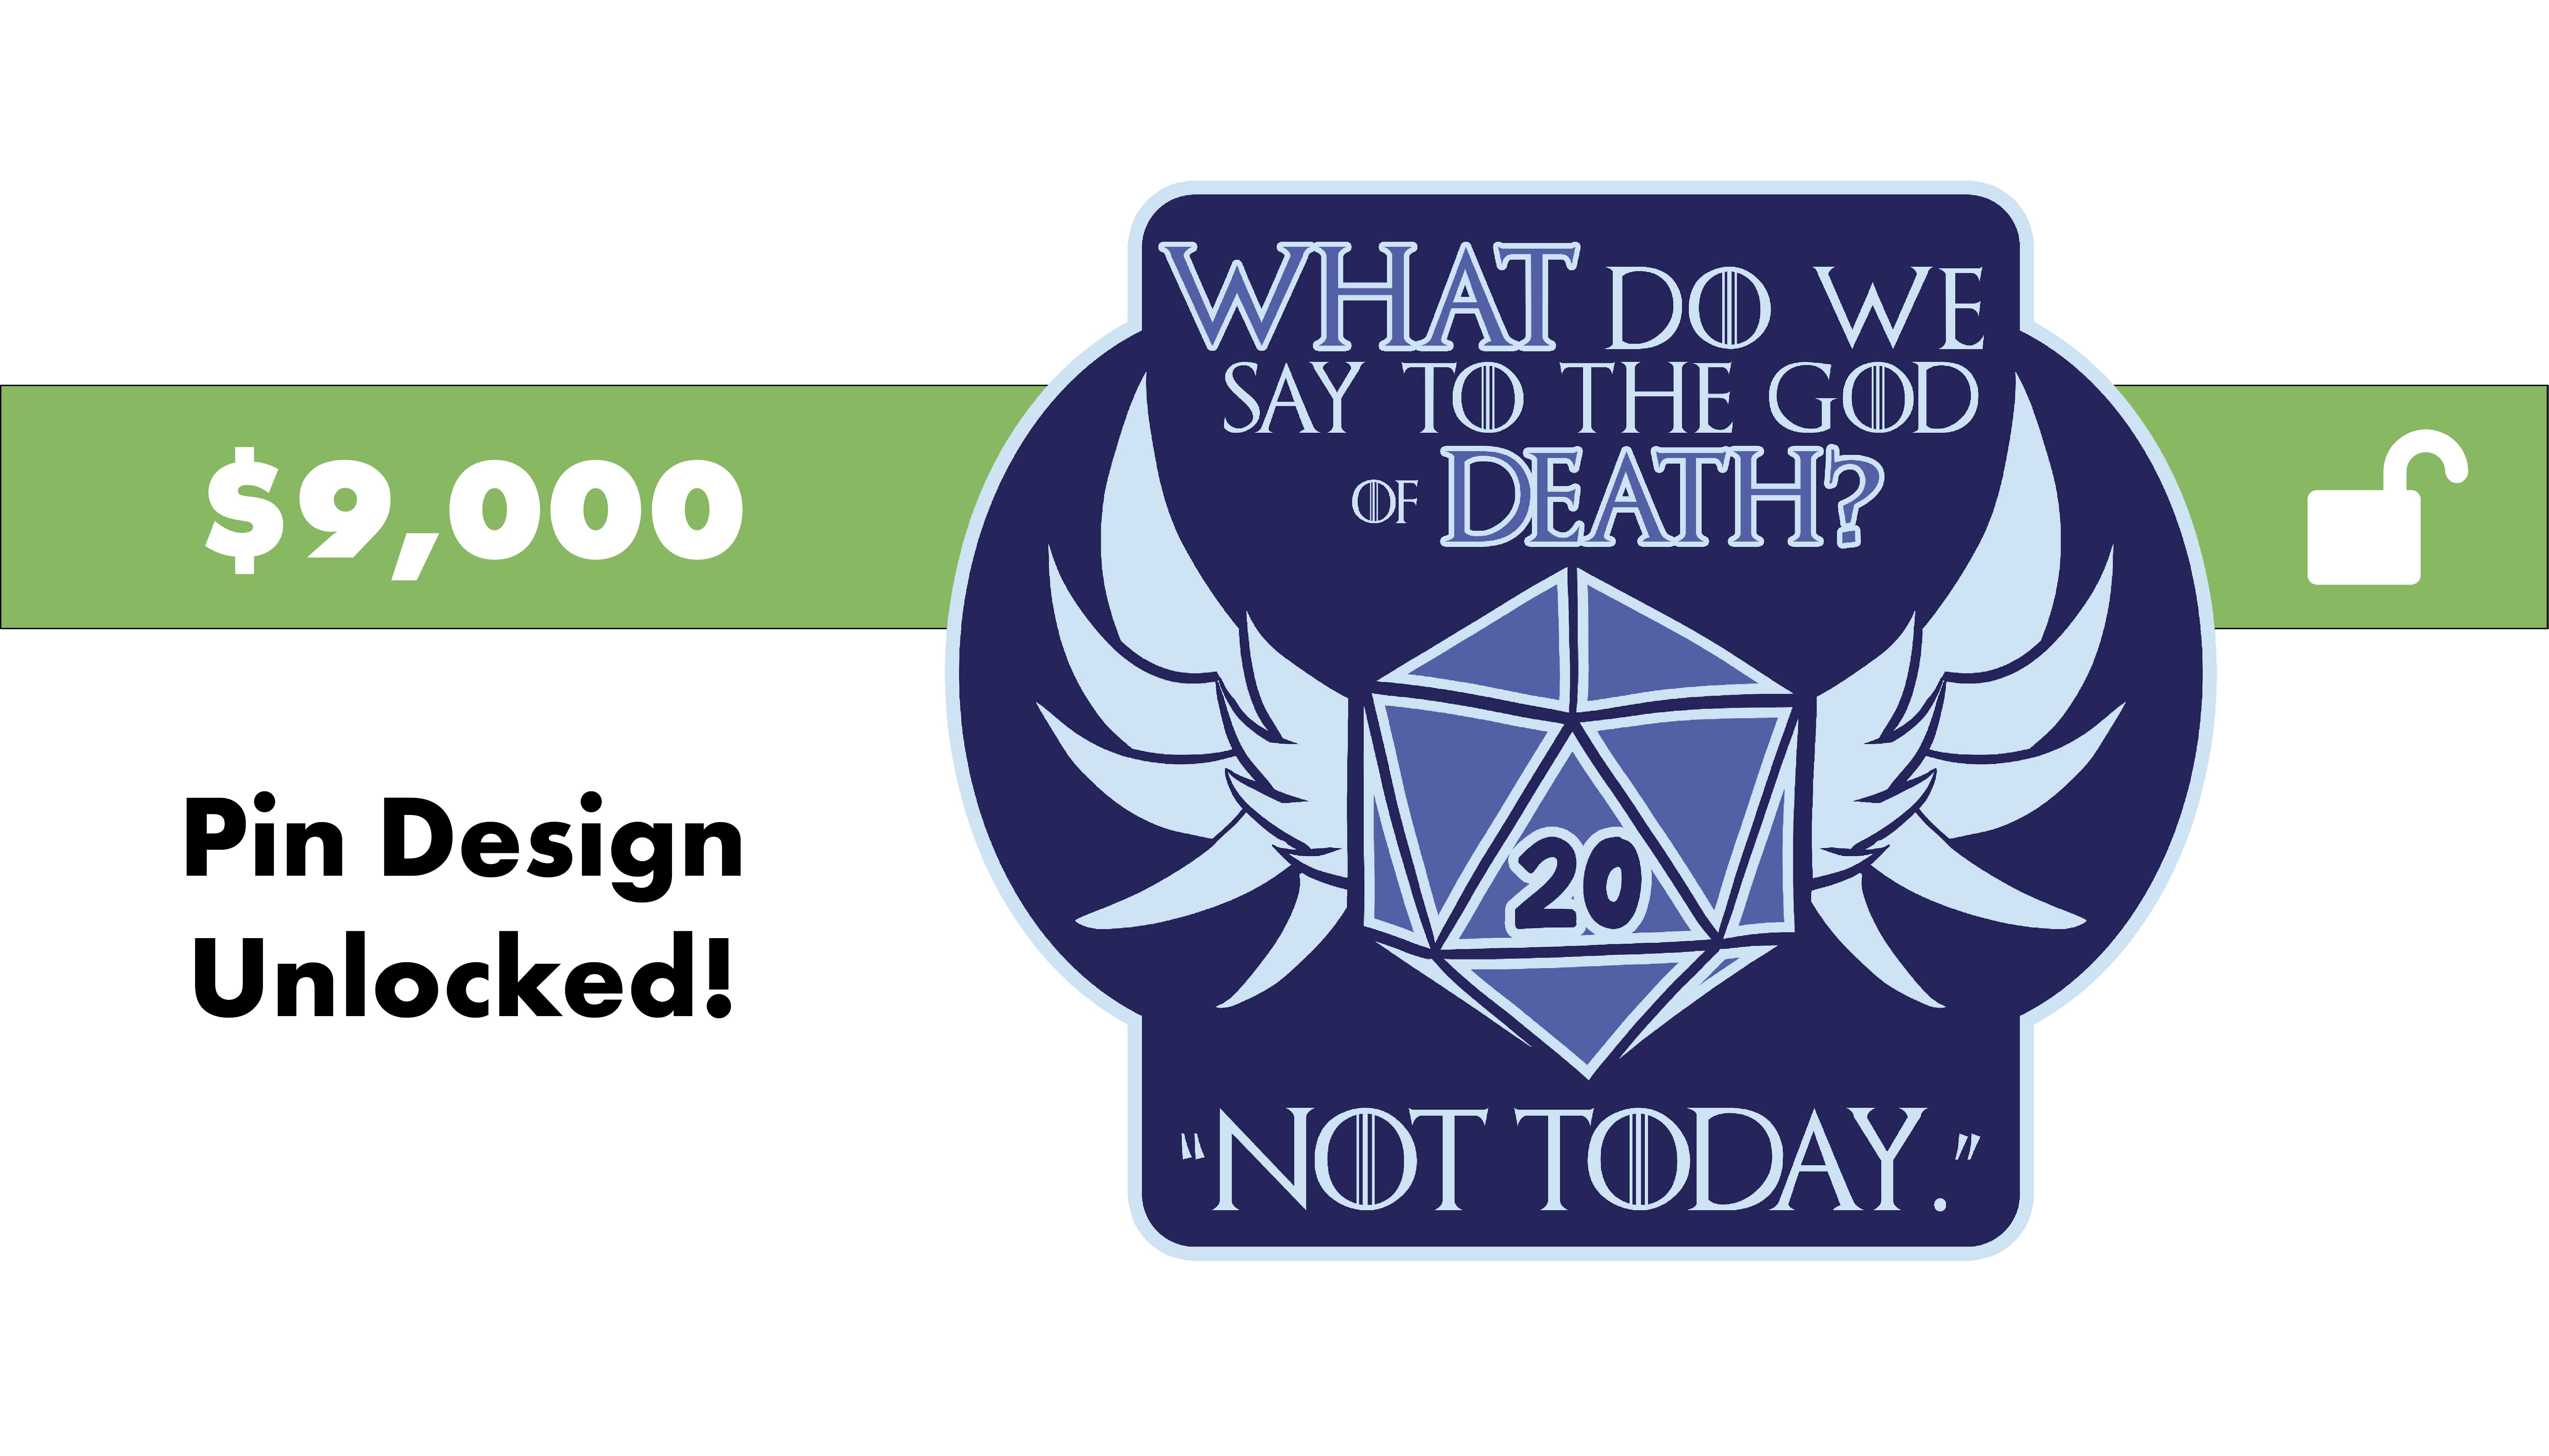 Unlock "What Do We Say to the God of Death?" Pin